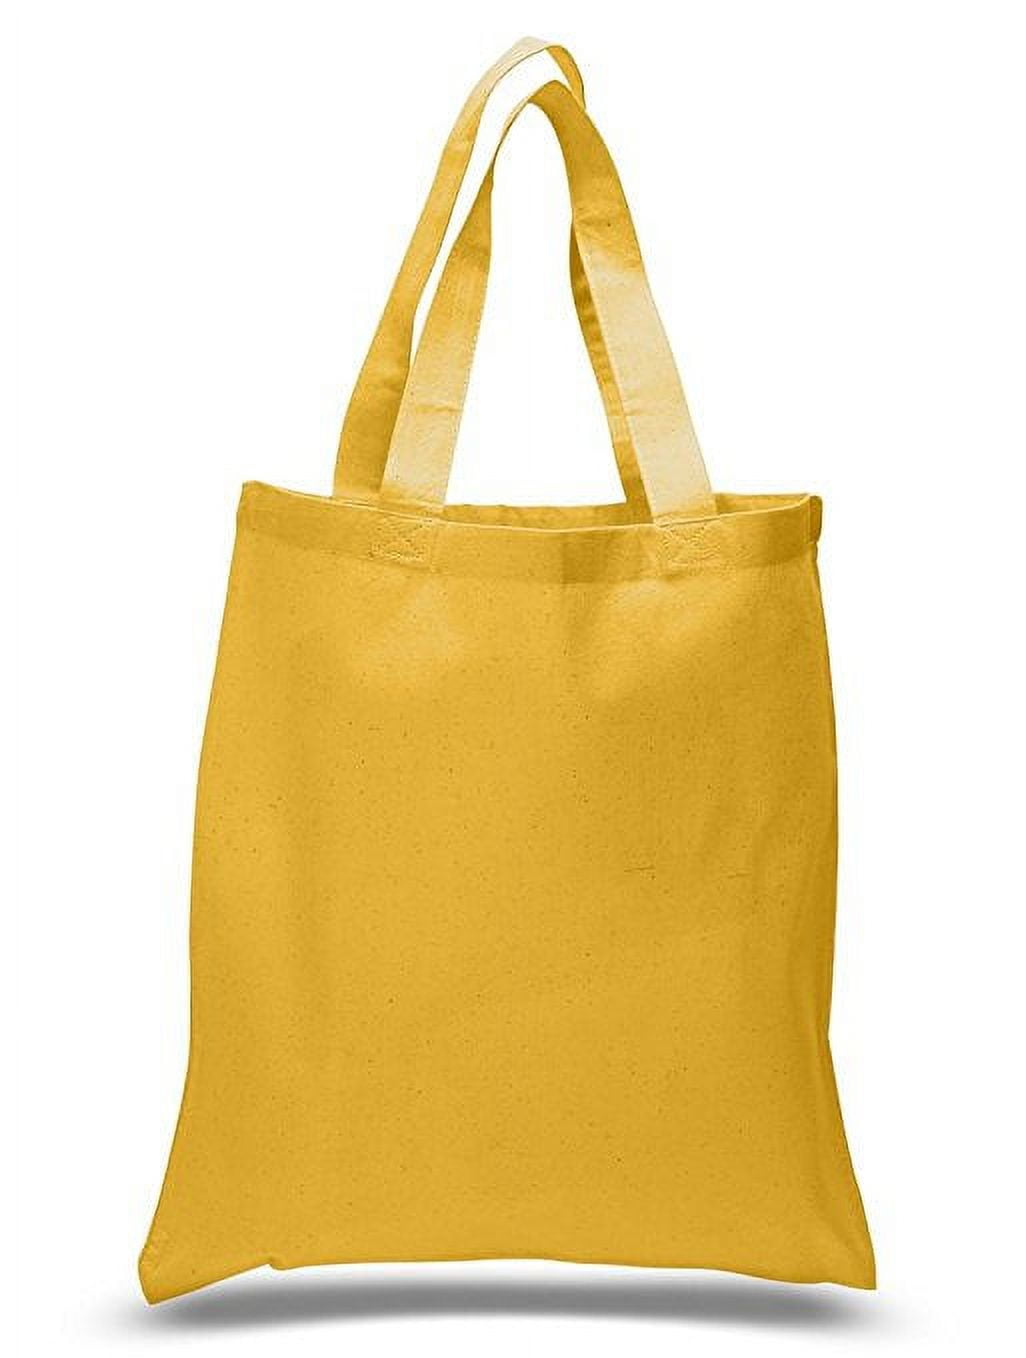 Draw blank Canvas Tote Bags. 24 Pack Suitable for DIY, foldable